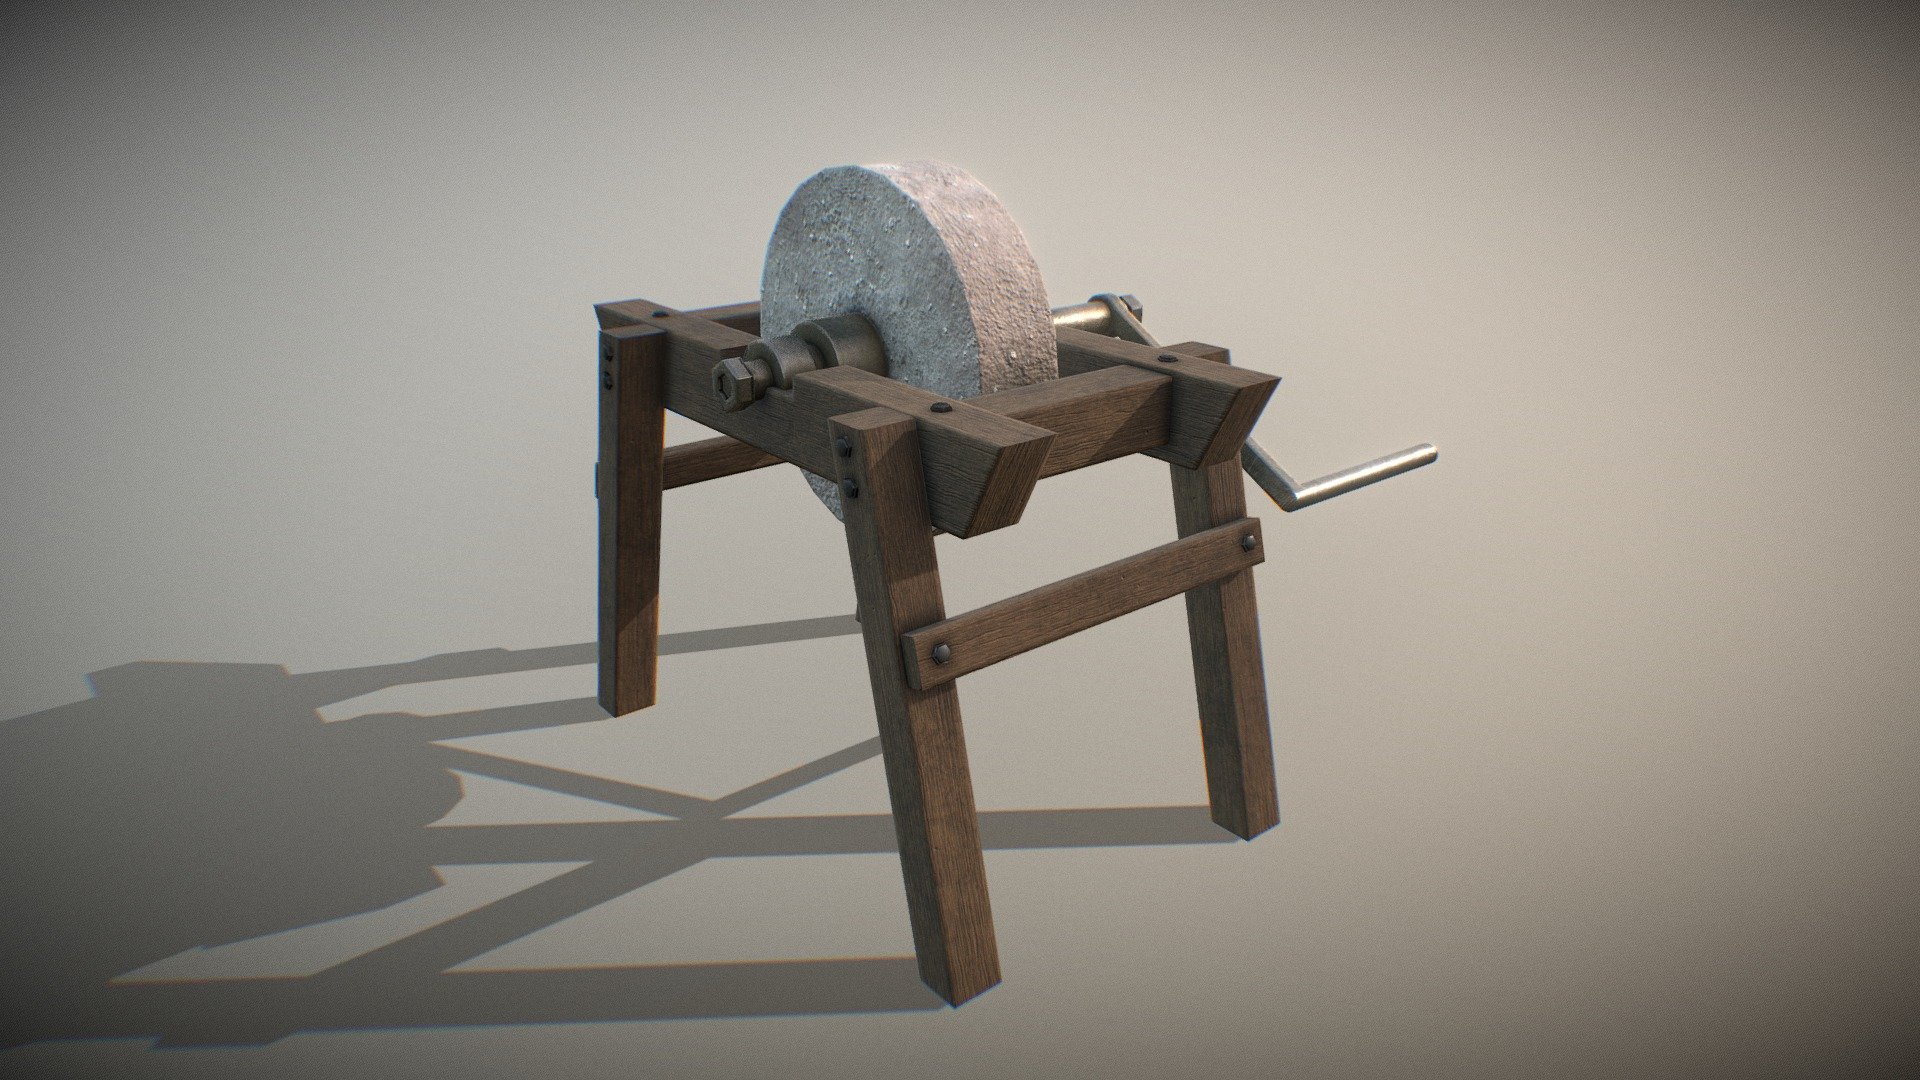 Old-fashioned grindstone from medieval era. Textures Size: 4096x4096 - Grindstone - 3D model by Reliefy3D (@Krystian.Kulasek) 3d model